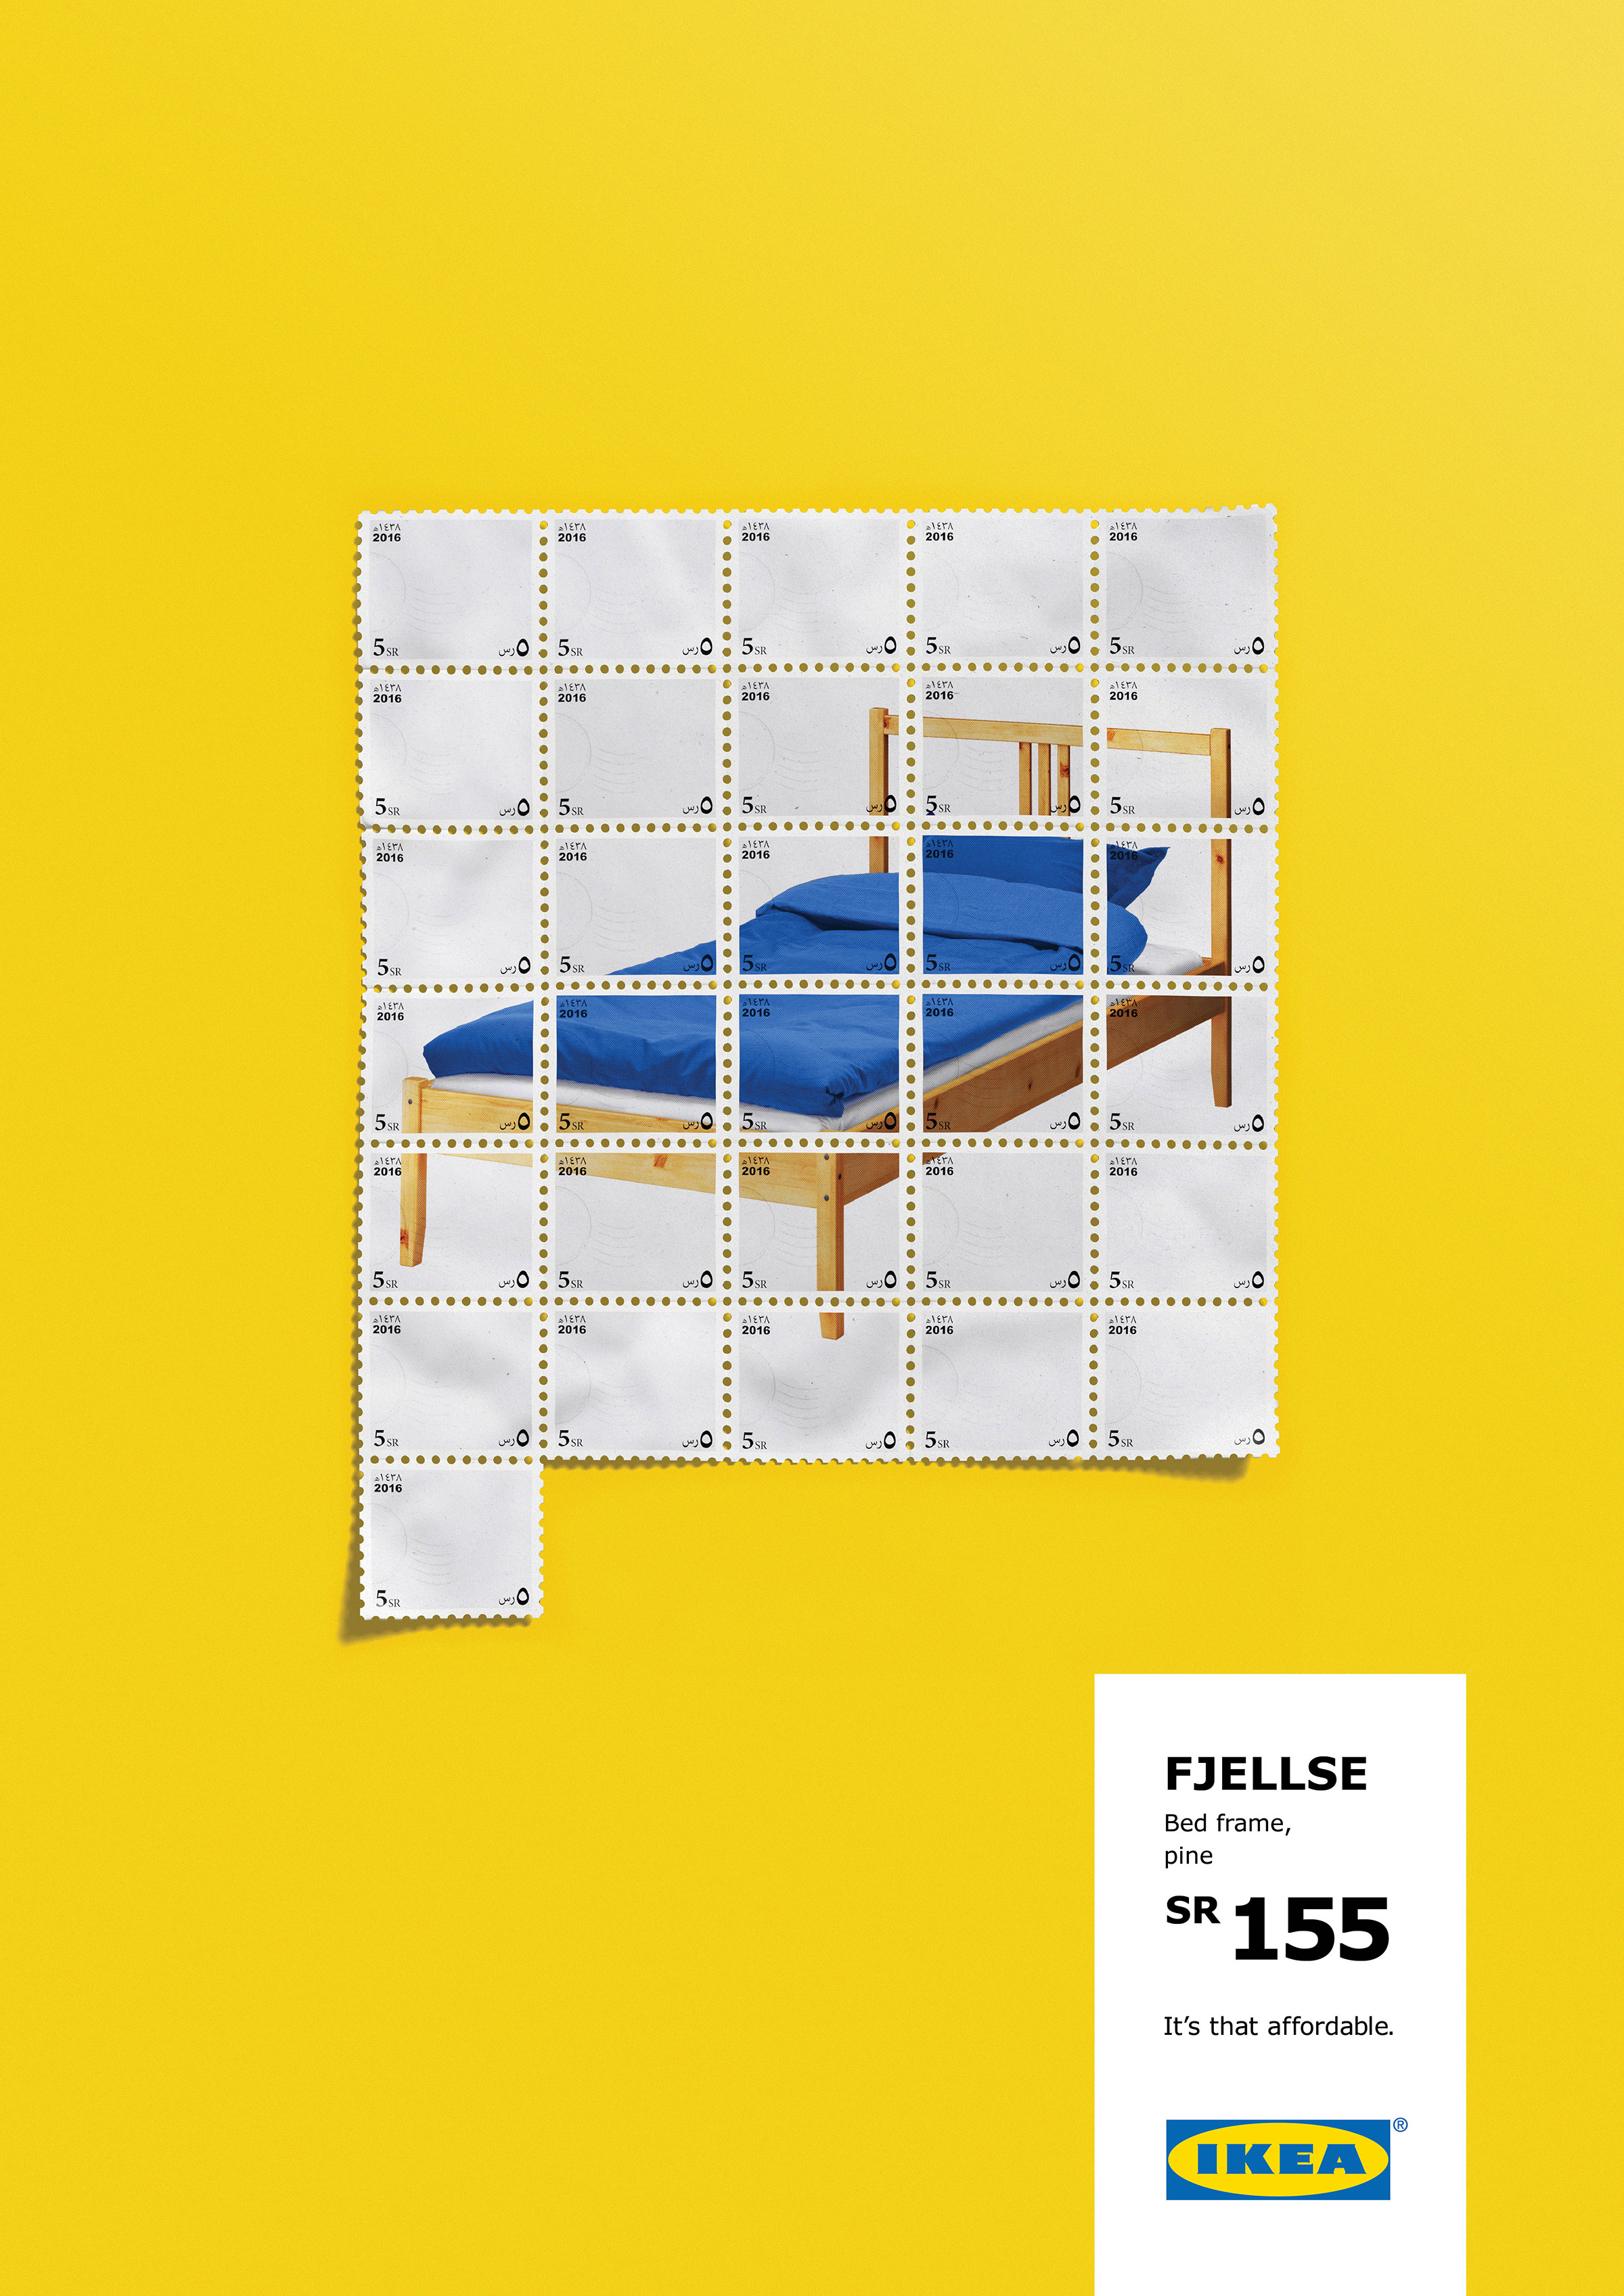 IKEA. It?s that affordable.